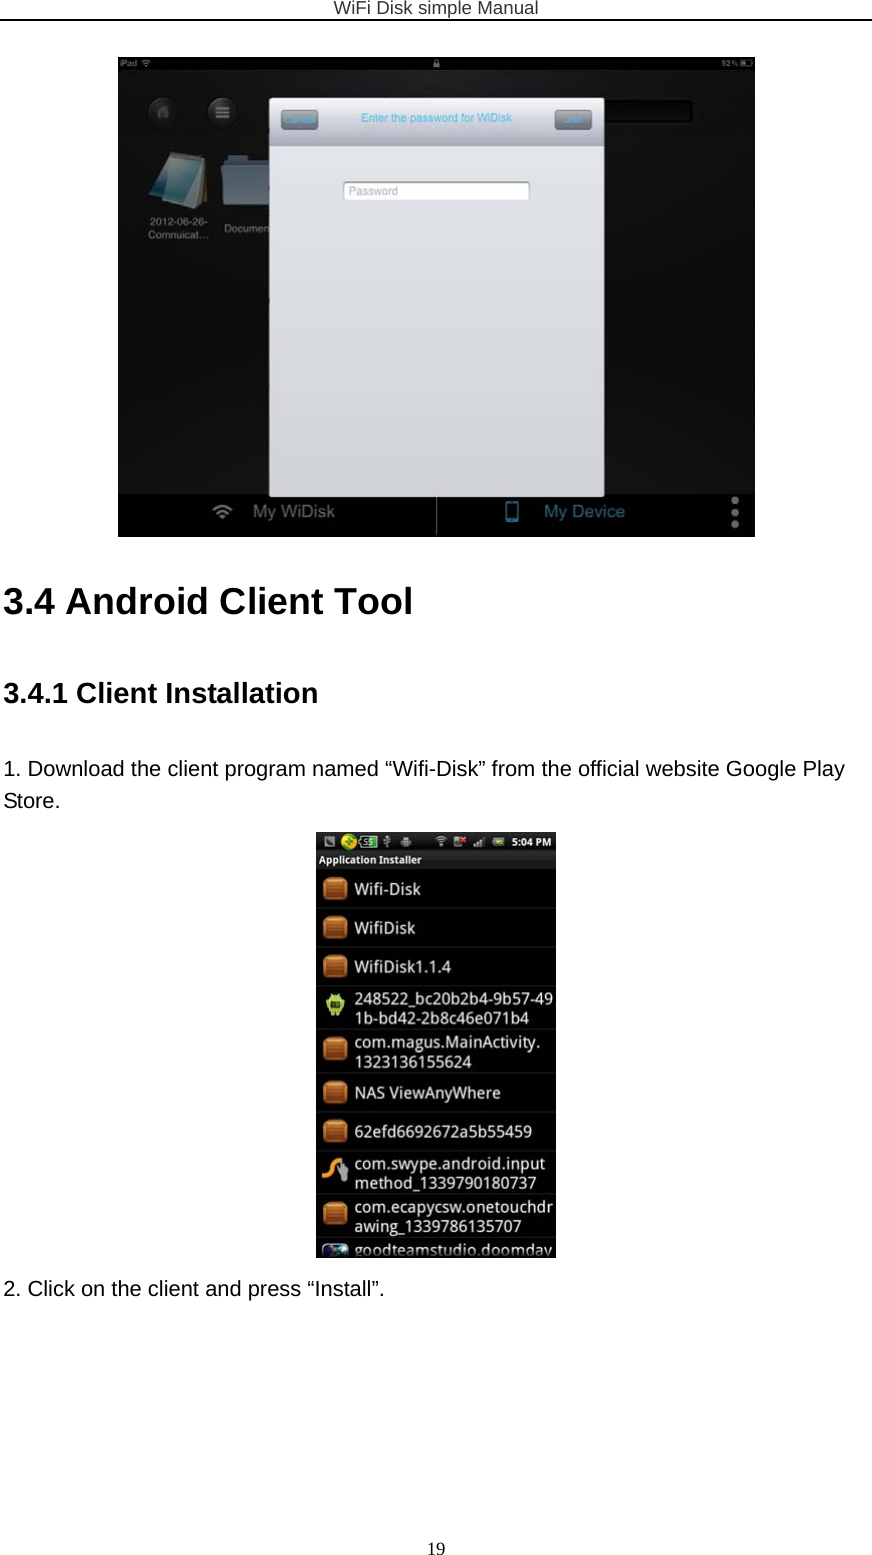 WiFi Disk simple Manual  19 3.4 Android Client Tool 3.4.1 Client Installation   1. Download the client program named “Wifi-Disk” from the official website Google Play Store.  2. Click on the client and press “Install”. 